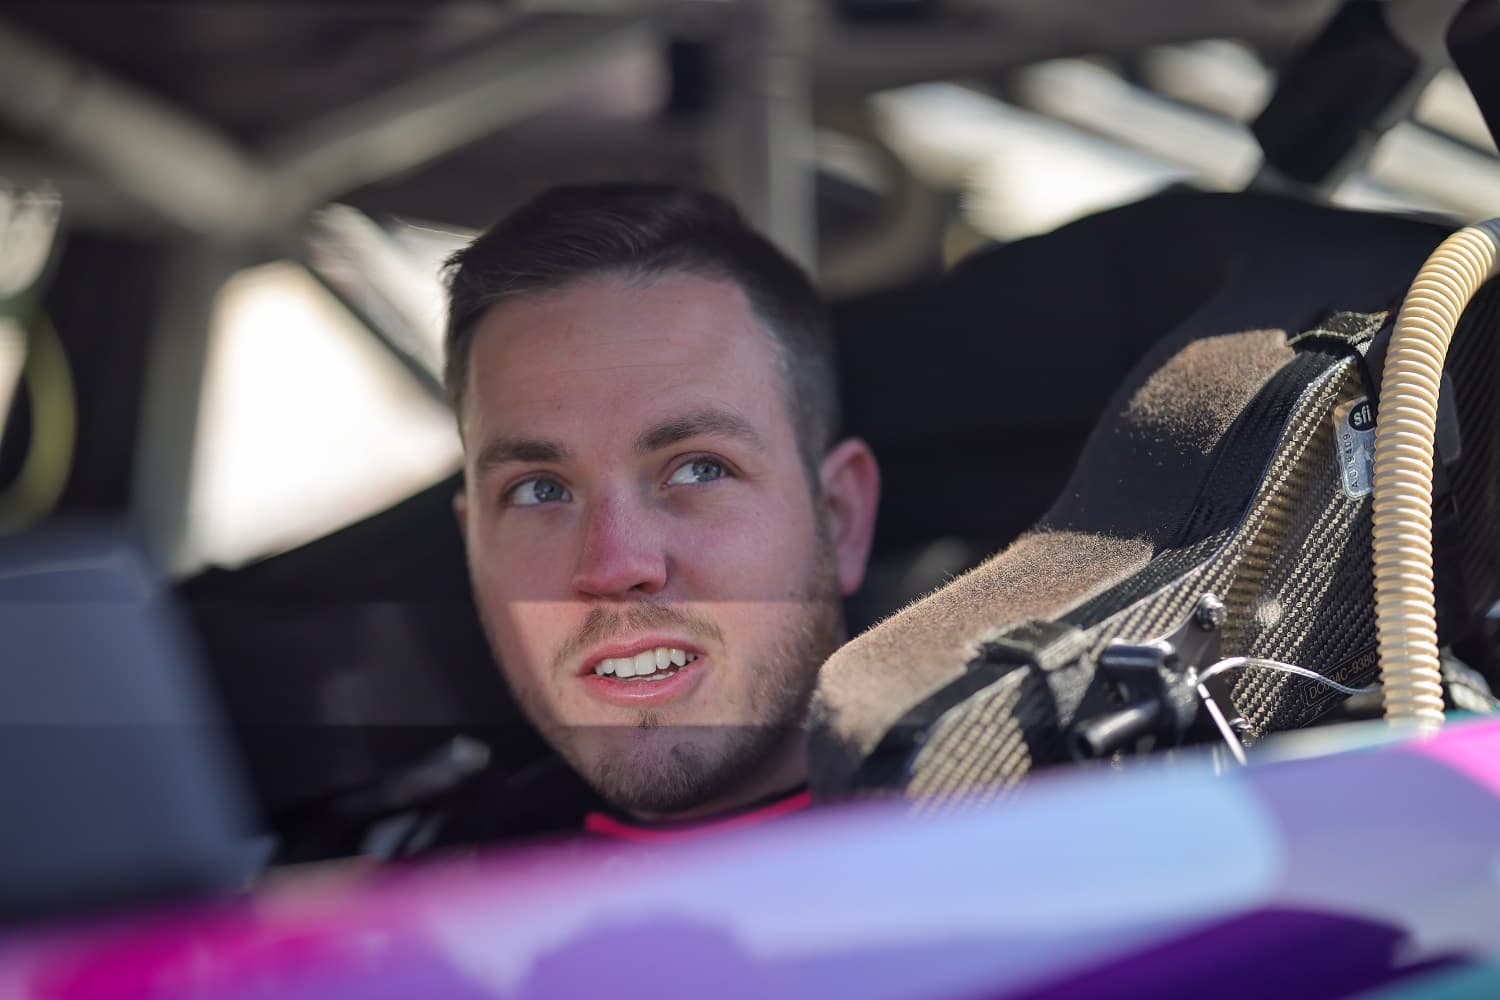 Alex Bowman sits in his No. 48 Chevy during qualifying for the NASCAR Cup Series Ambetter Health 400 at Atlanta Motor Speedway on March 18, 2023.